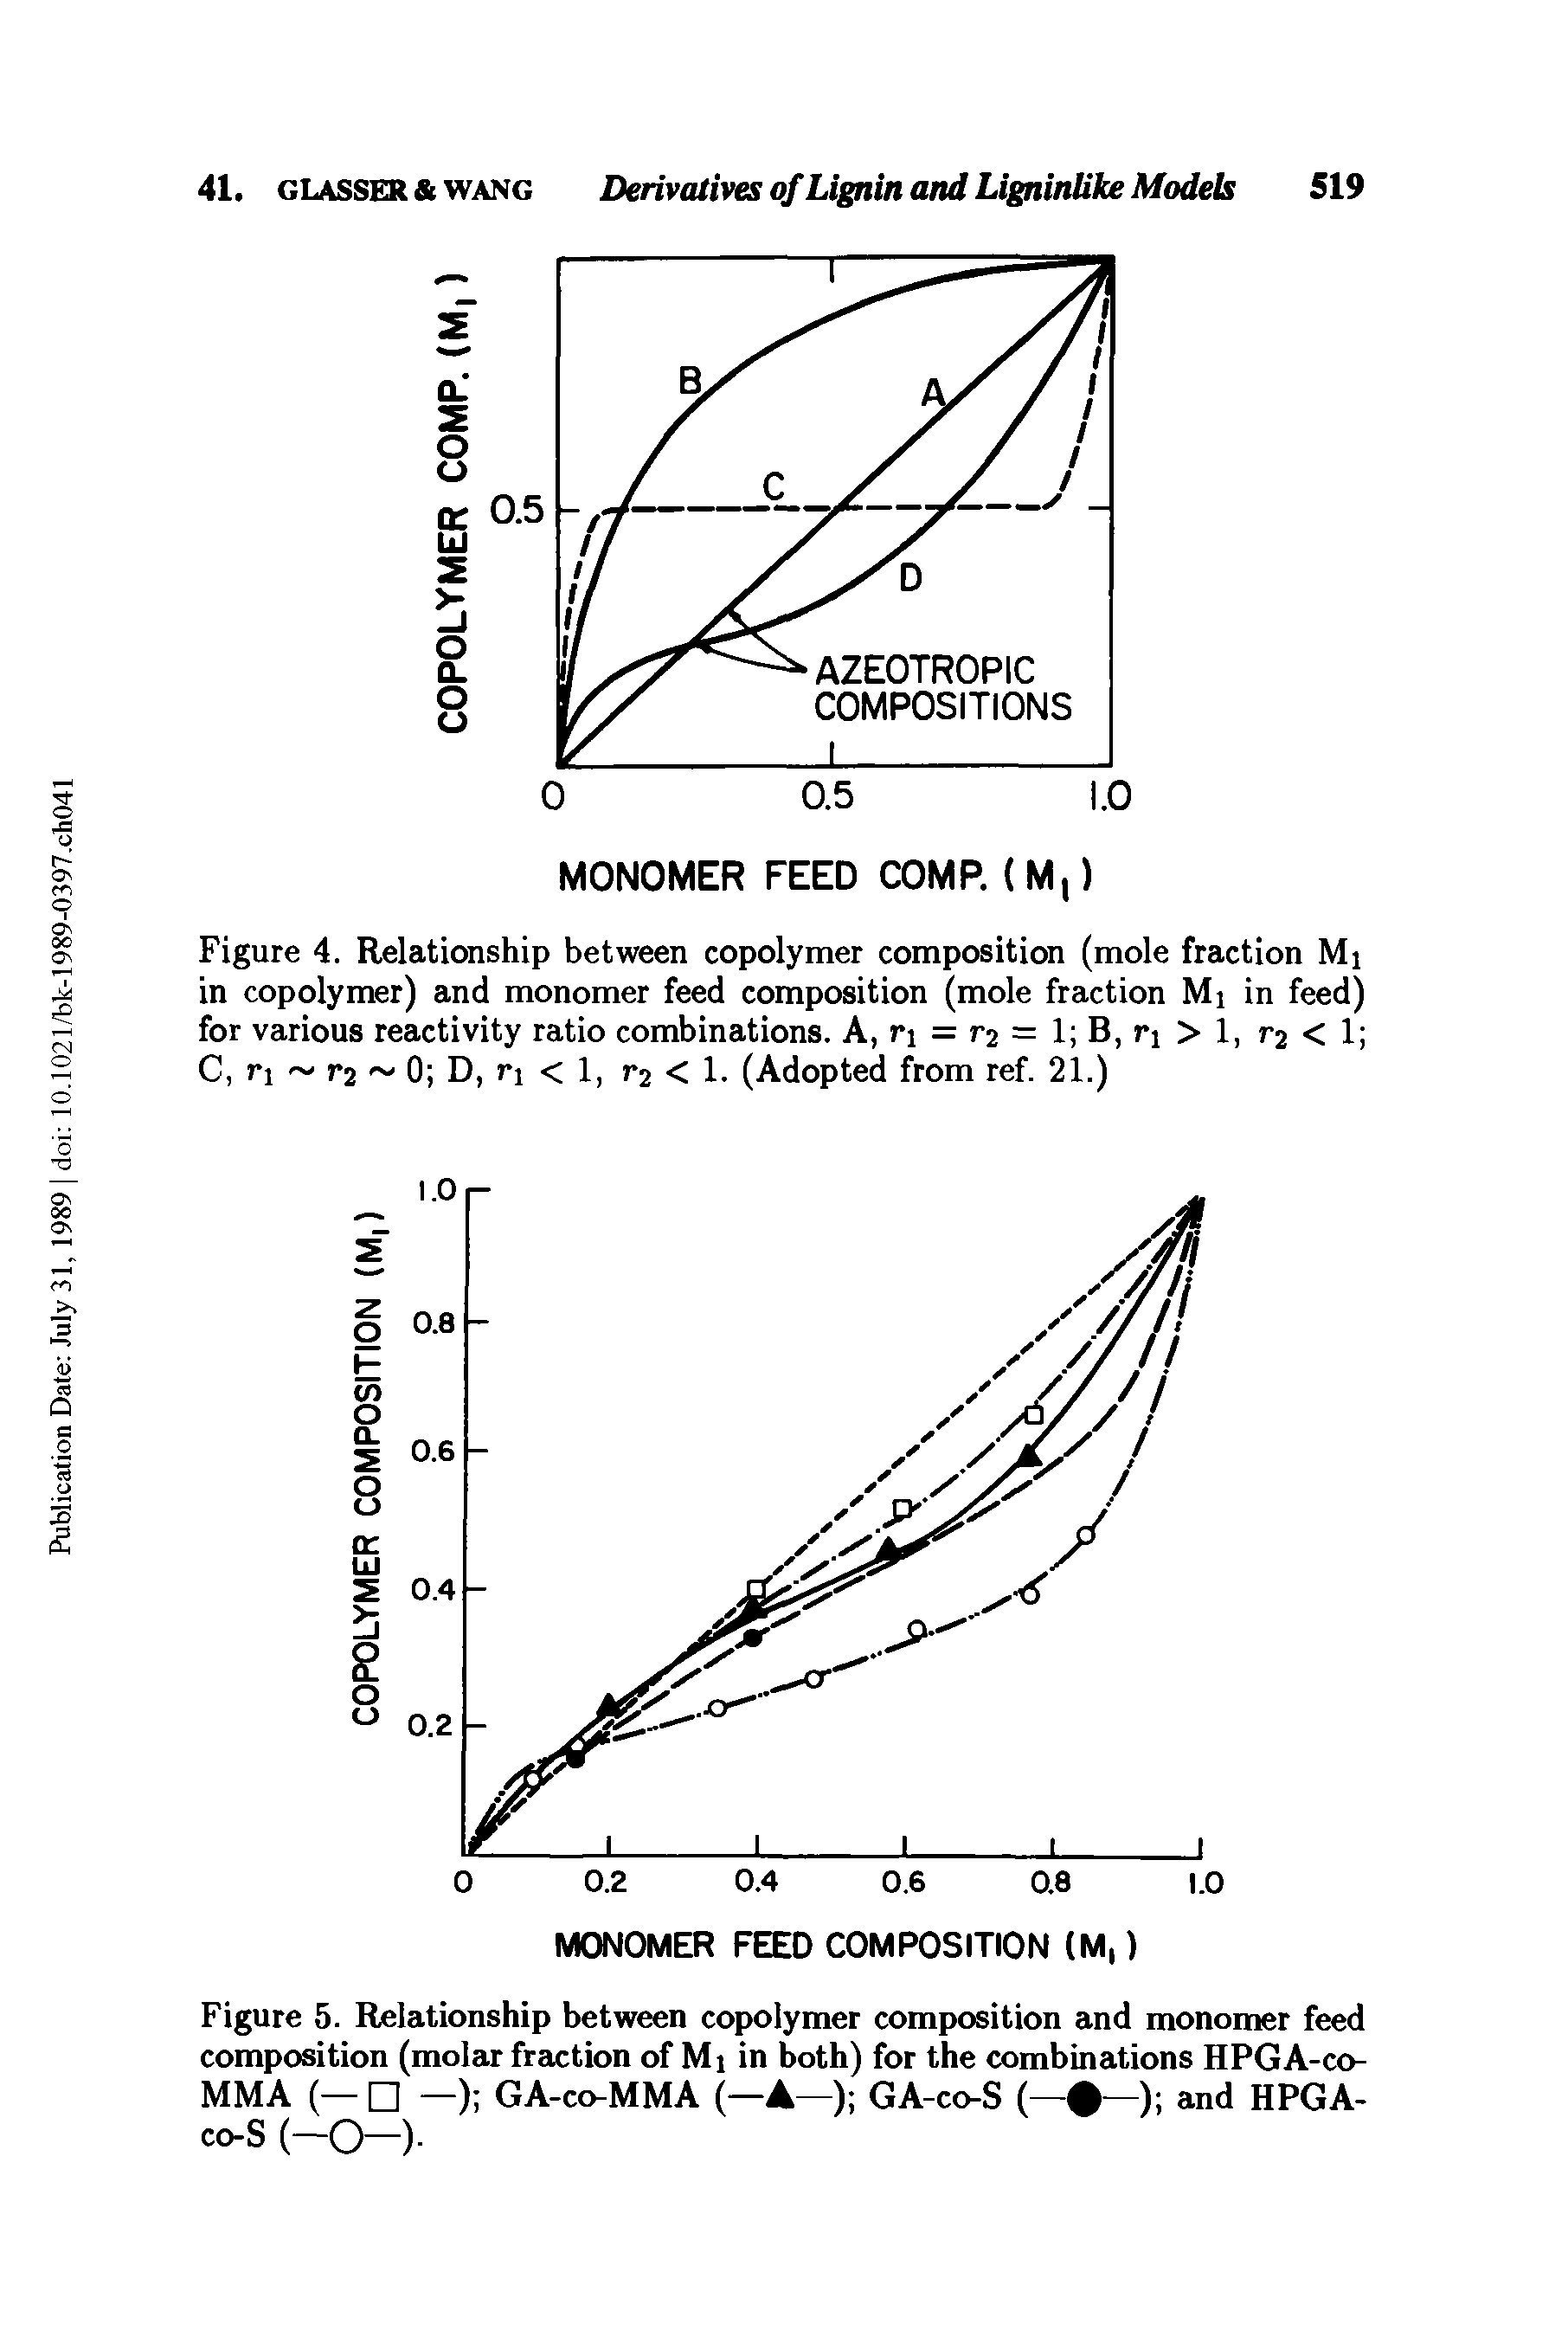 Figure 4. Relationship between copolymer composition (mole fraction Mi in copolymer) and monomer feed composition (mole fraction Mi in feed) for various reactivity ratio combinations. A, n = r2 = 1 B, ri > 1, r2 < 1 C, n r2 0 D, n < 1, r2 < 1. (Adopted from ref. 21.)...